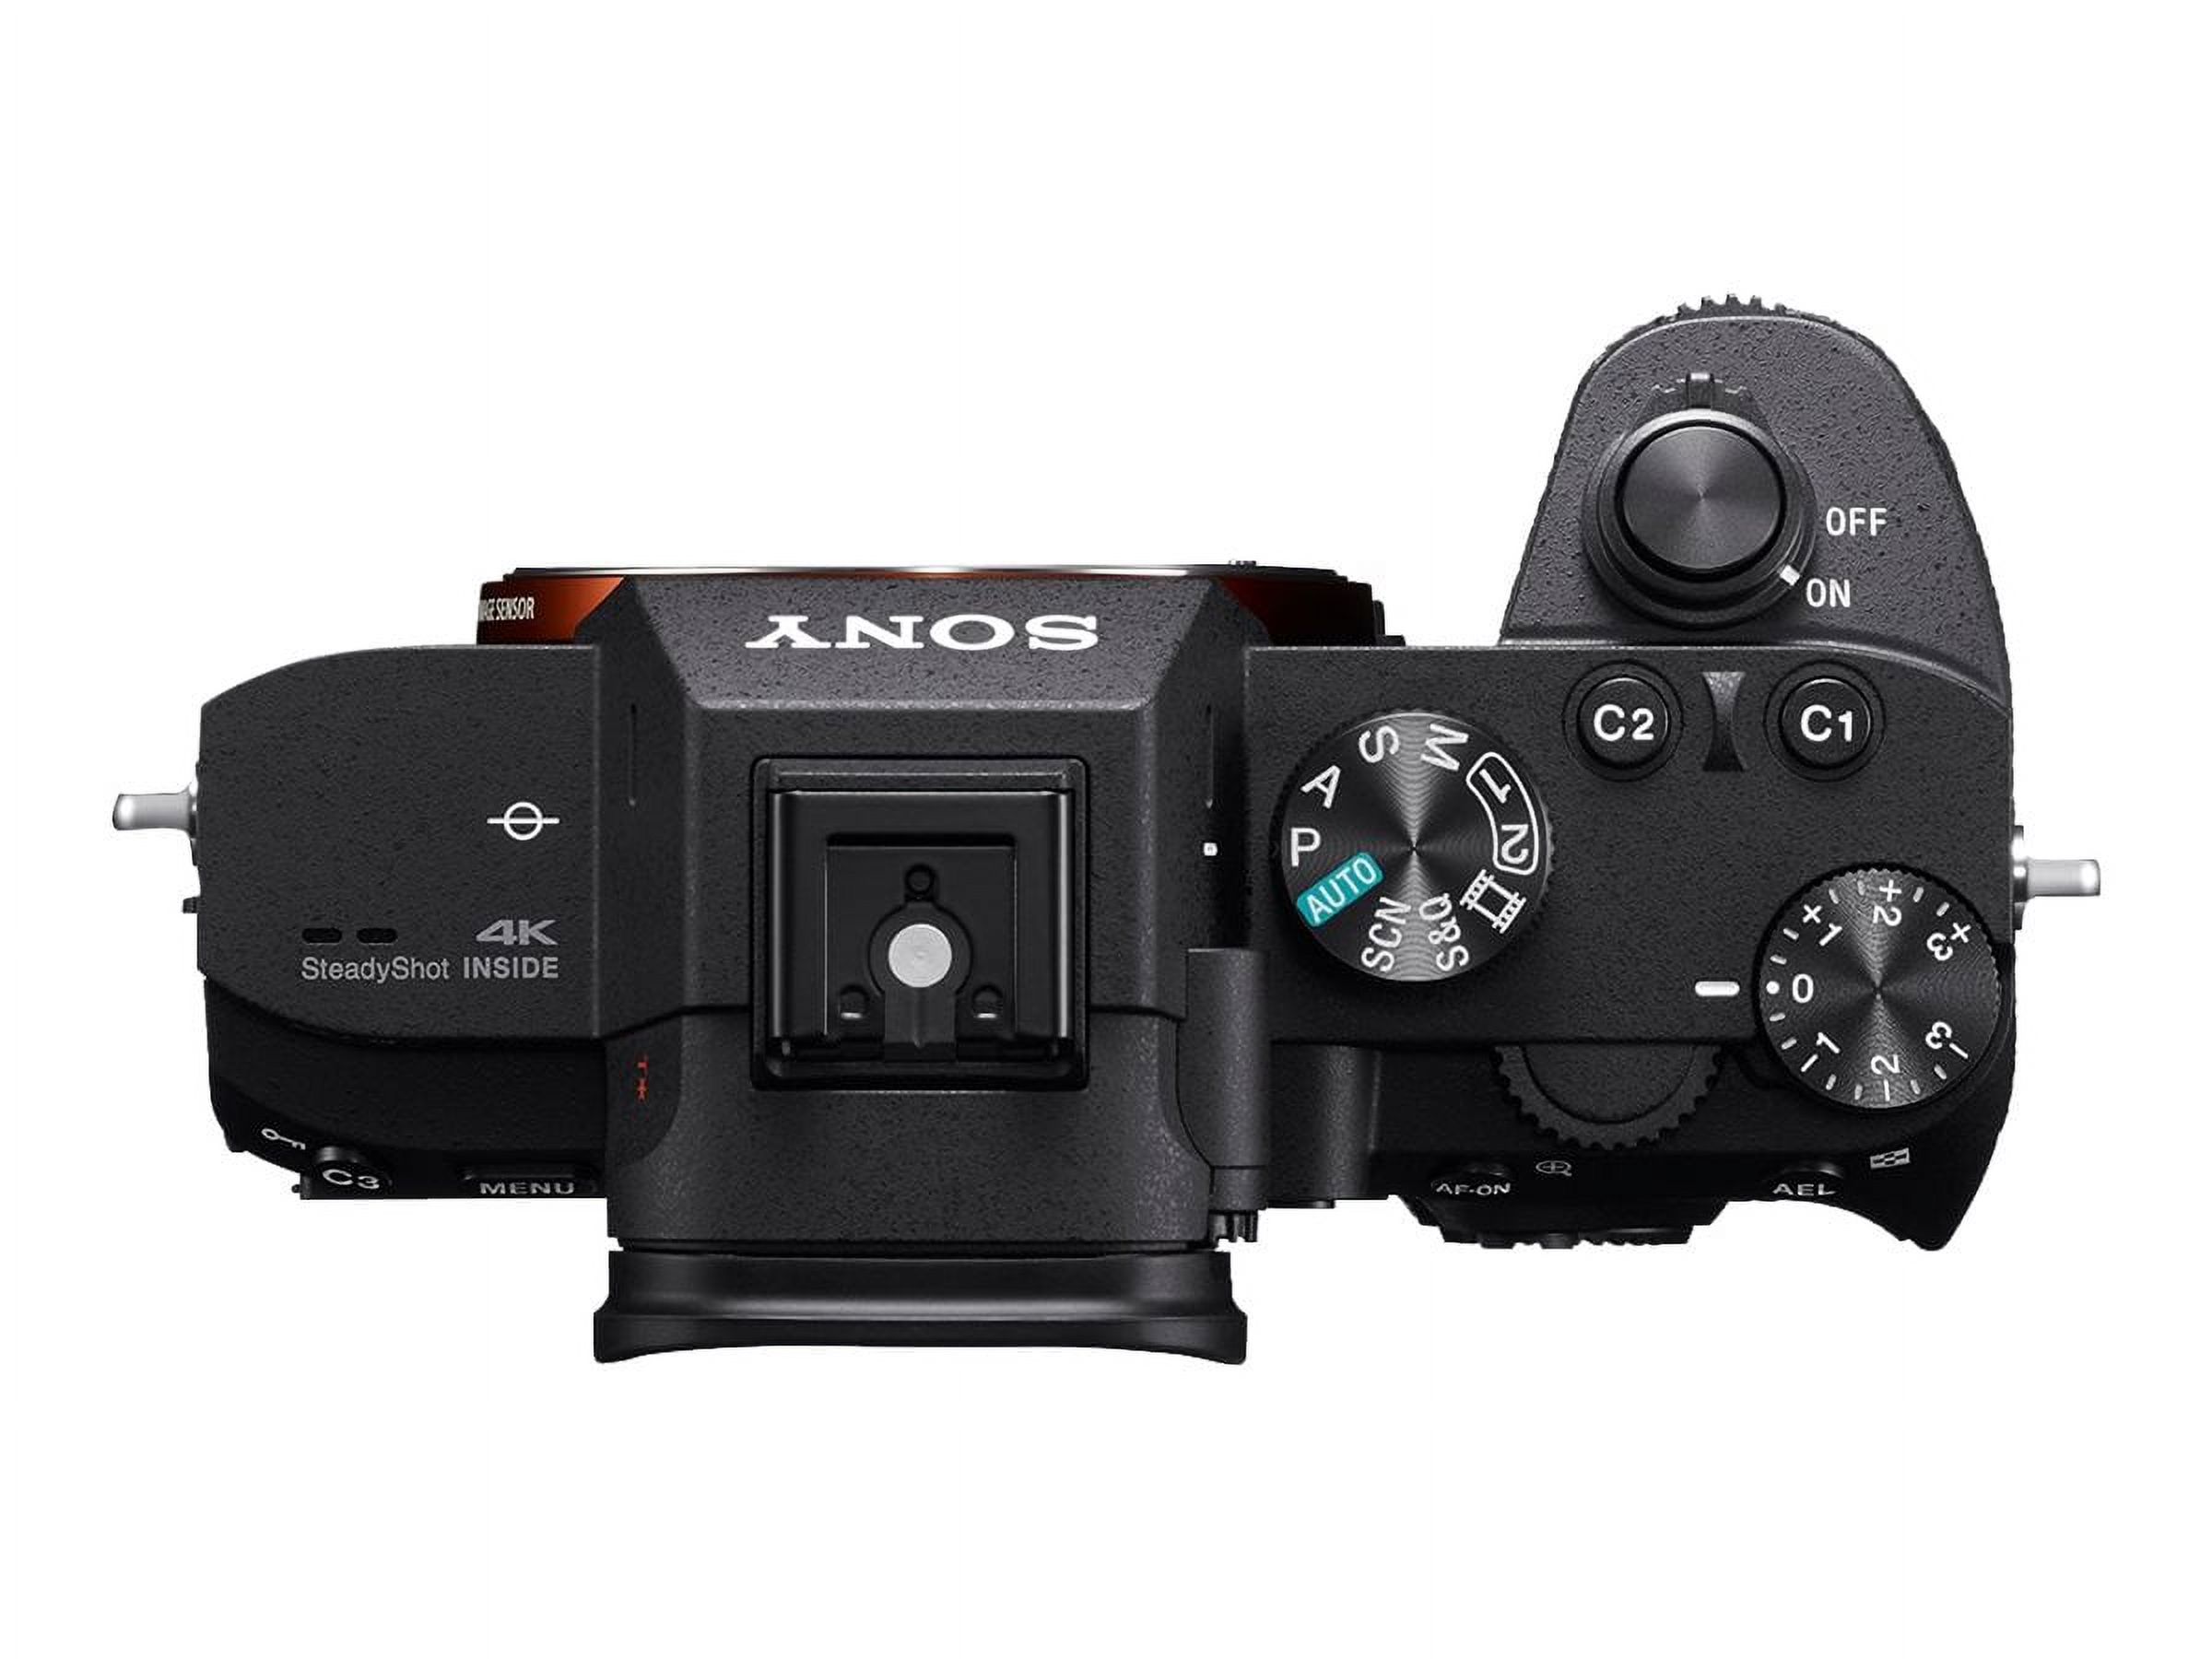 Sony a7 III ILCE-7M3 - Digital camera - mirrorless - 24.2 MP - Full Frame - 4K / 30 fps - body only - Wi-Fi, NFC, Bluetooth - image 2 of 6